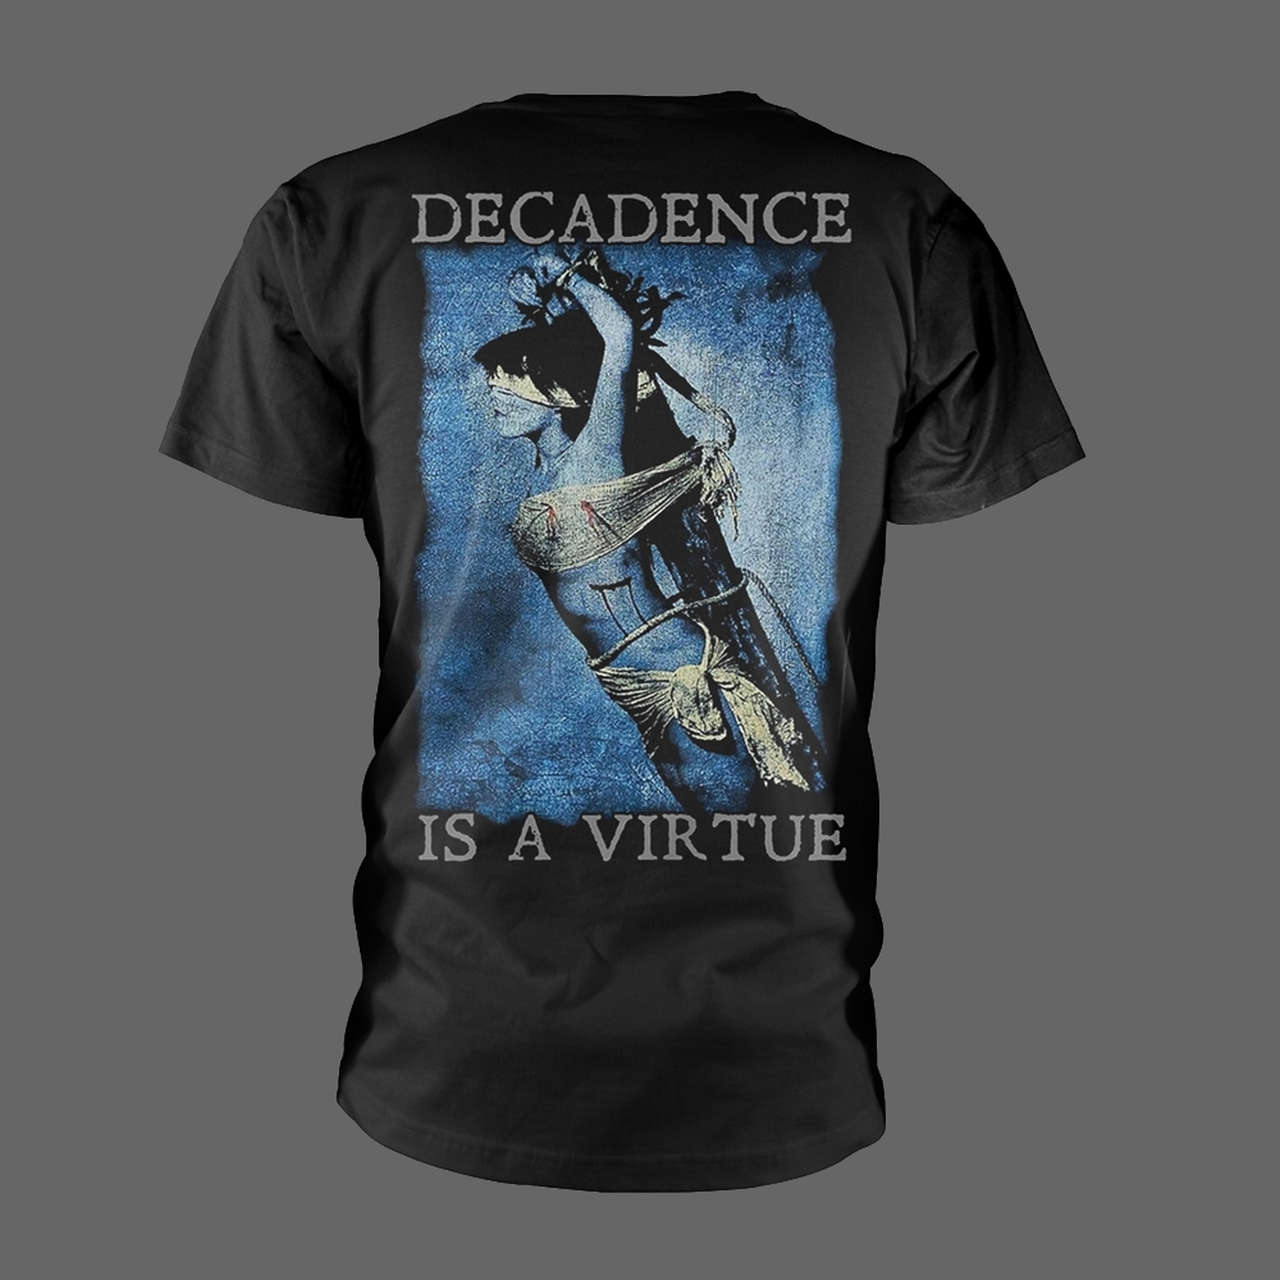 Cradle of Filth - Decadence is a Virtue (T-Shirt)